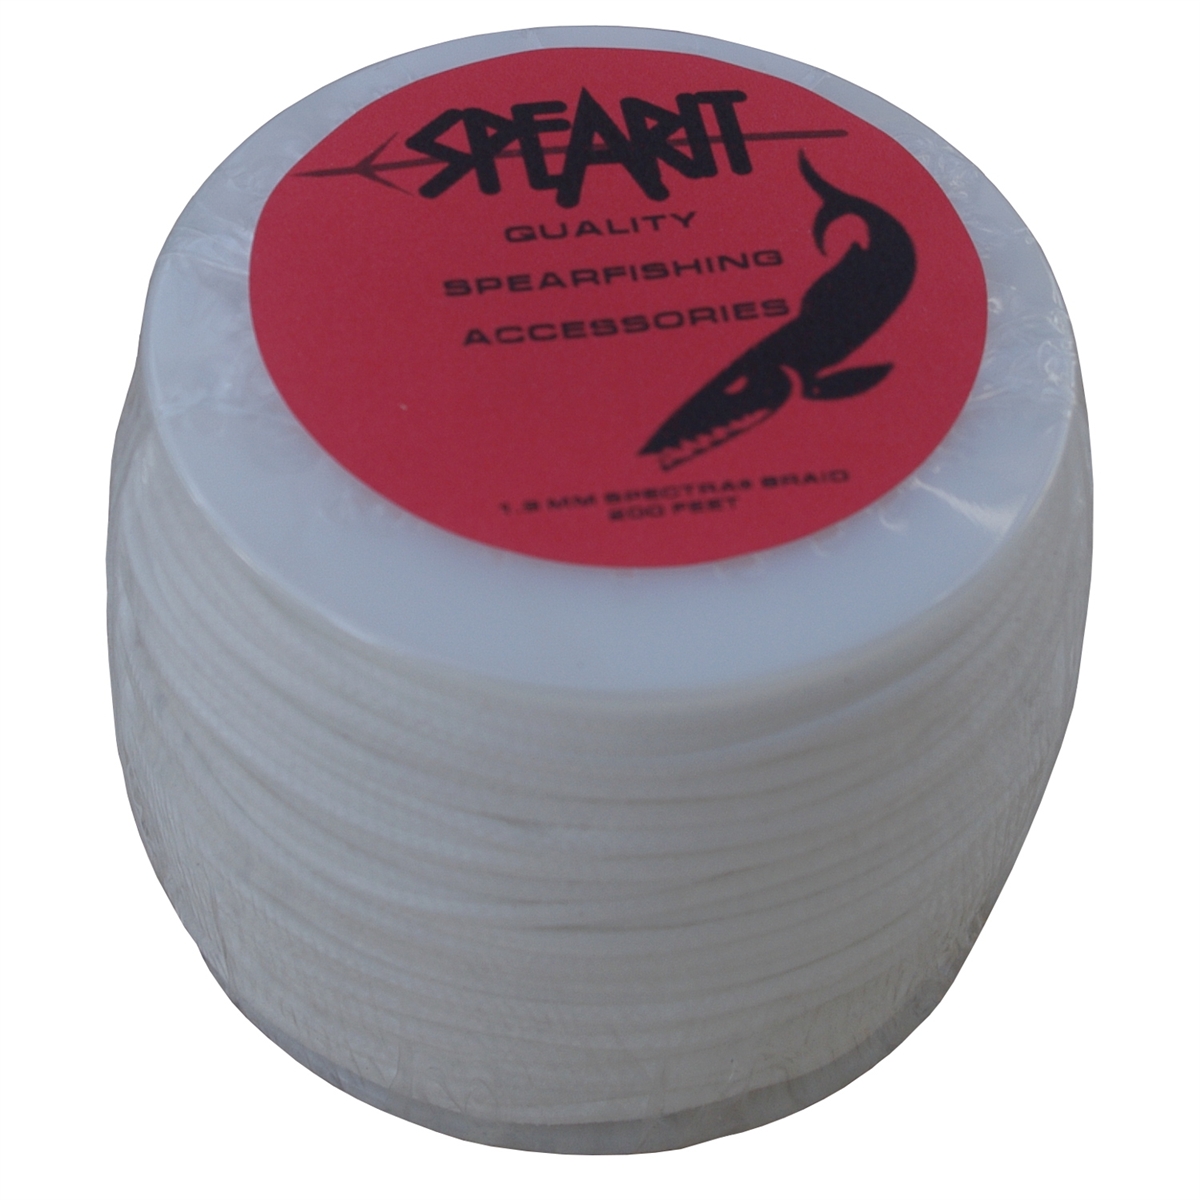 Spearit 1.9mm Braided SpectraÂ® Cord Speargun Reel Line and Wishbone Cord